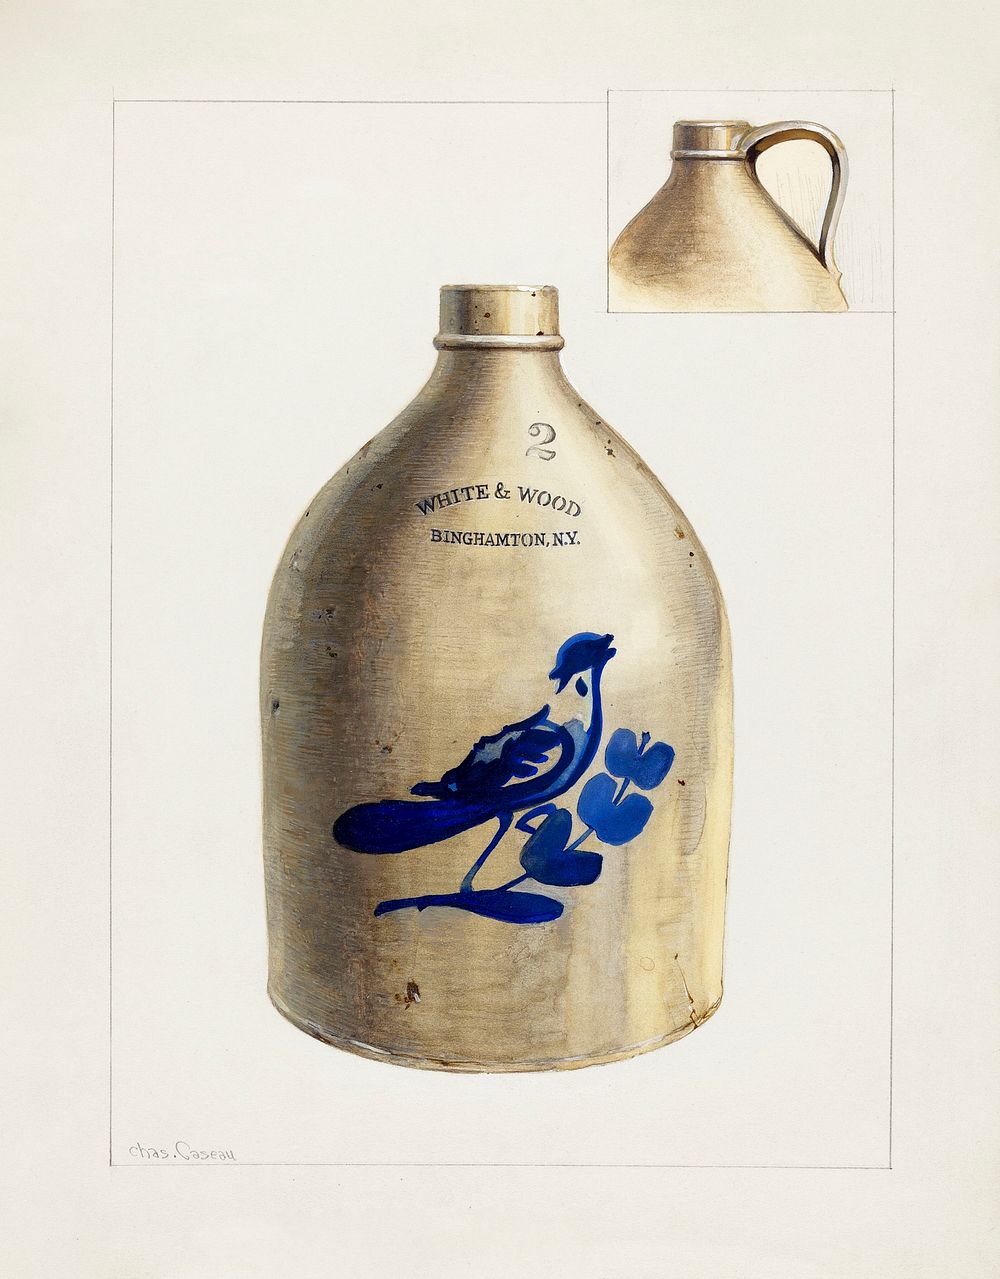 Jug (ca. 1940) by Charles Caseau. Original from The National Gallery of Art. Digitally enhanced by rawpixel.